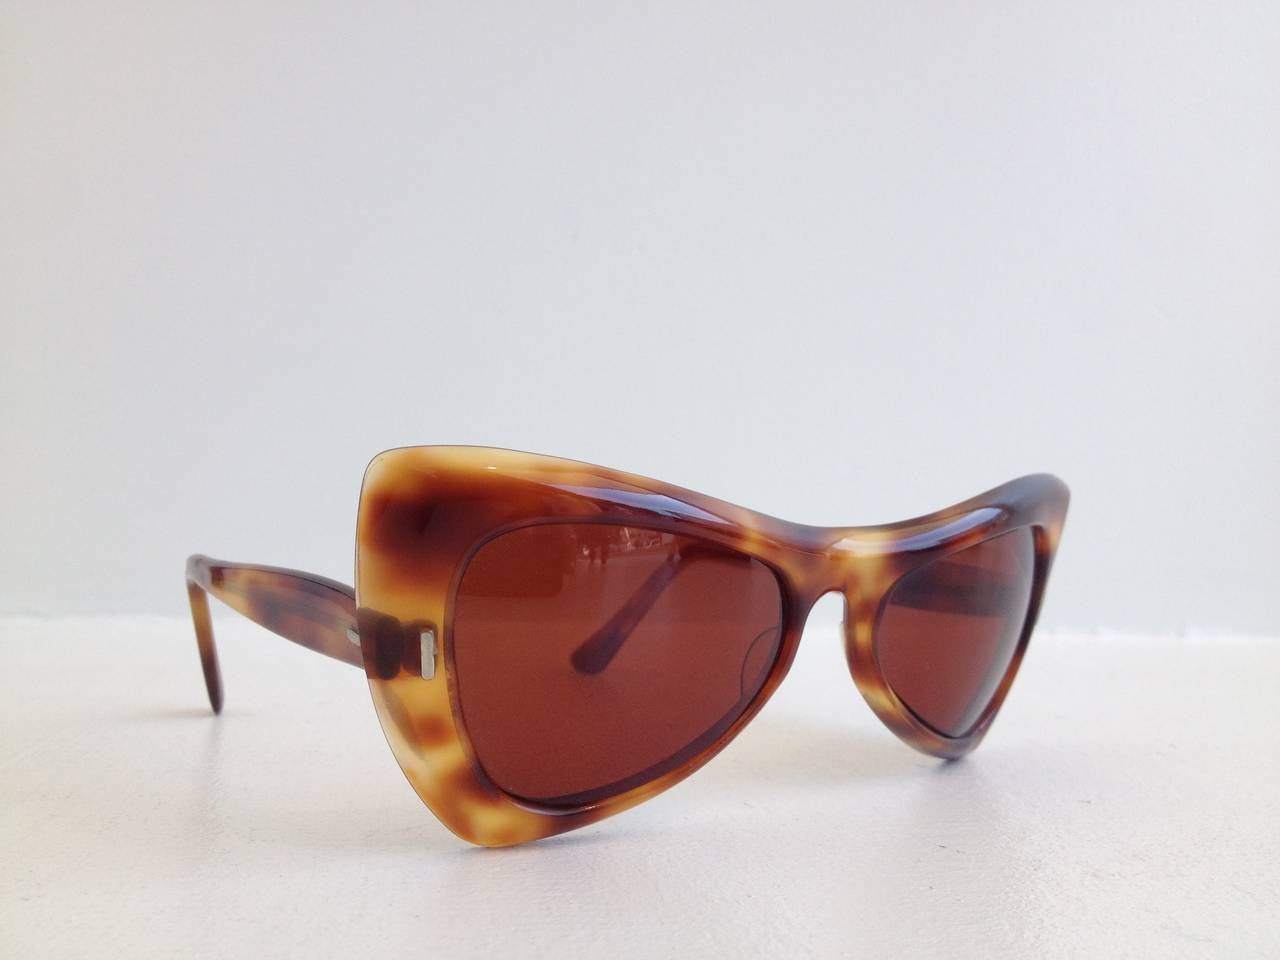 Rare and collectible designer Paulette Guinet is known for her surprising and fun designs that rocked the 1950s. This pair is shaped like an exaggerated cateye, extremely angular and elongated, and crafted from a beautiful caramel colored tortoise